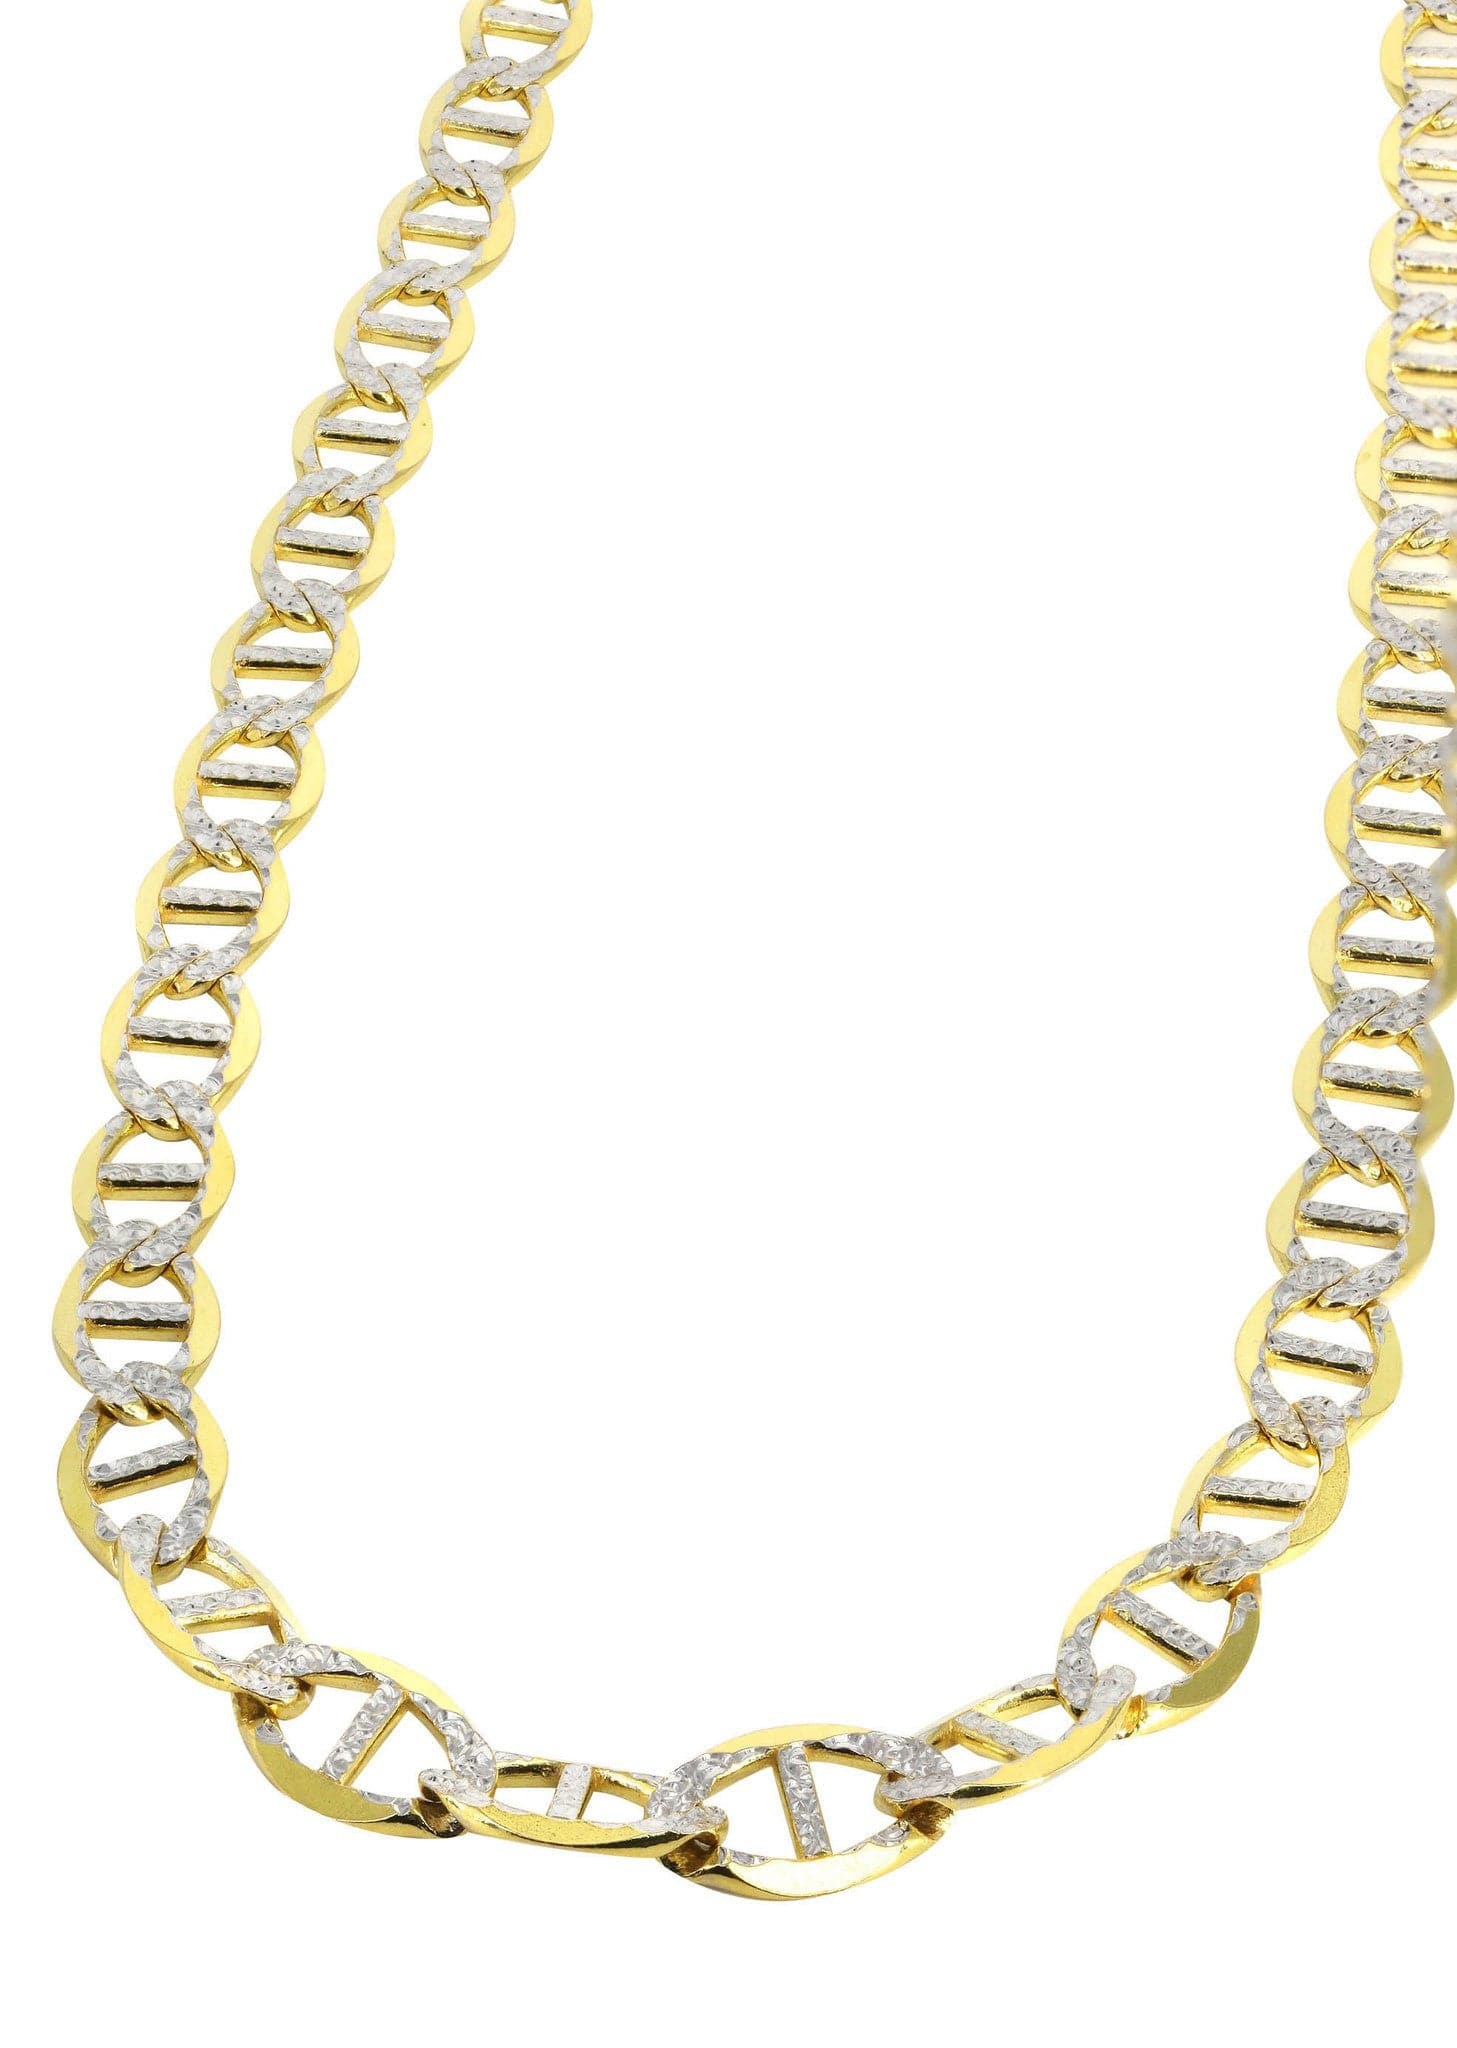 Gold Chain - Mens Diamond Cut Mariner Chain 10K Gold - FrostNYC